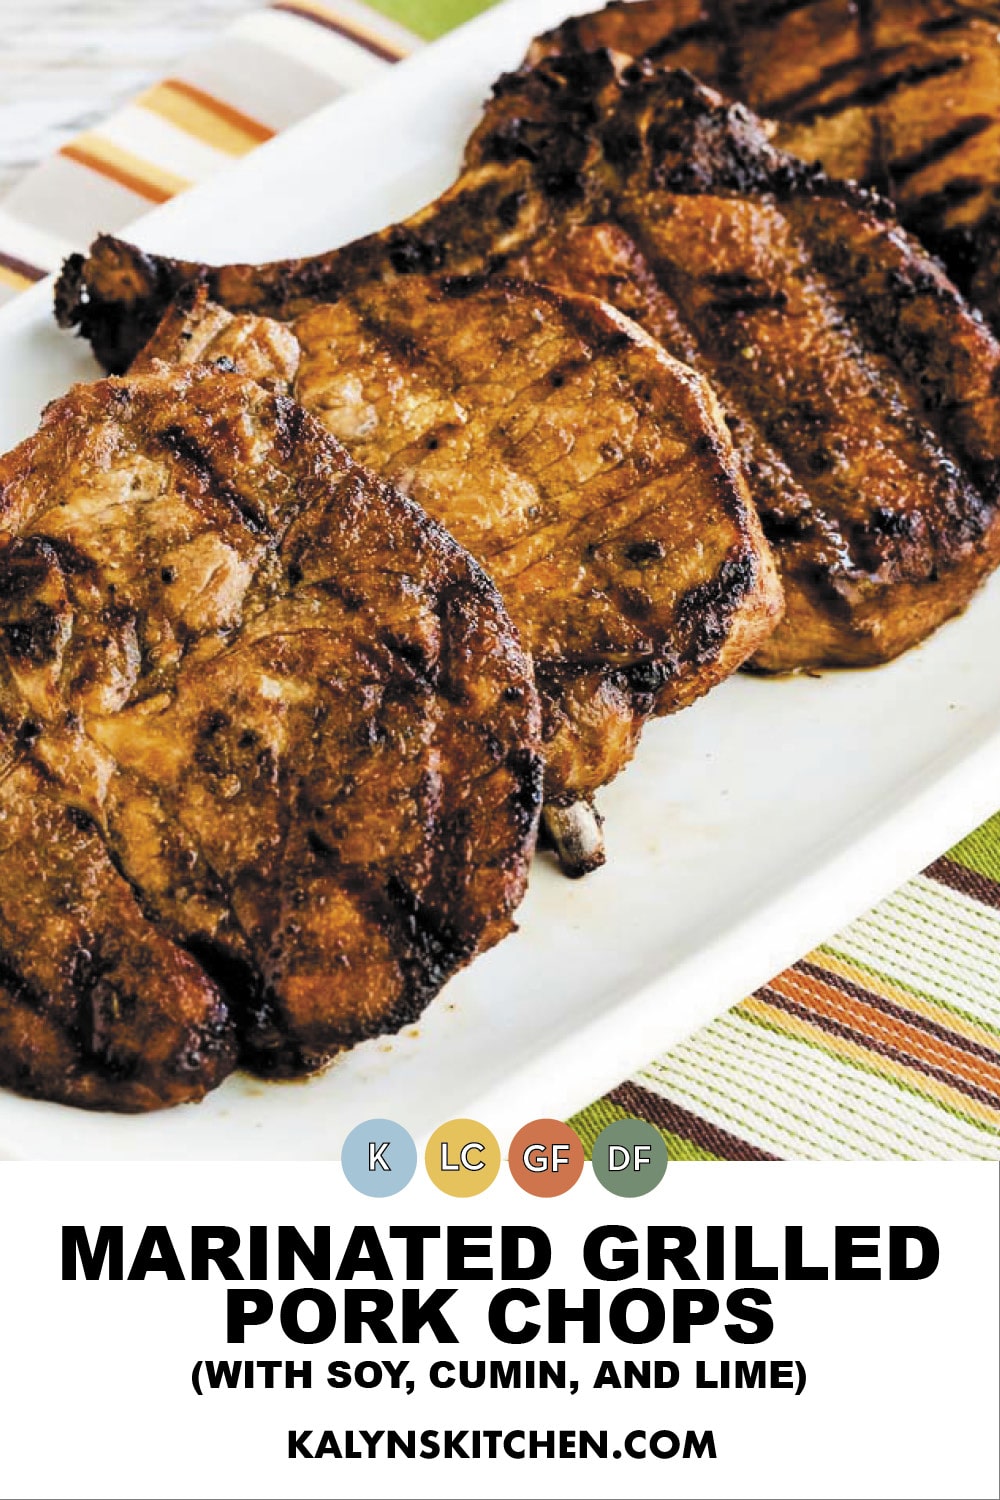 Pinterest image of Marinated Grilled Pork Chops (with Soy, Cumin, and Lime)